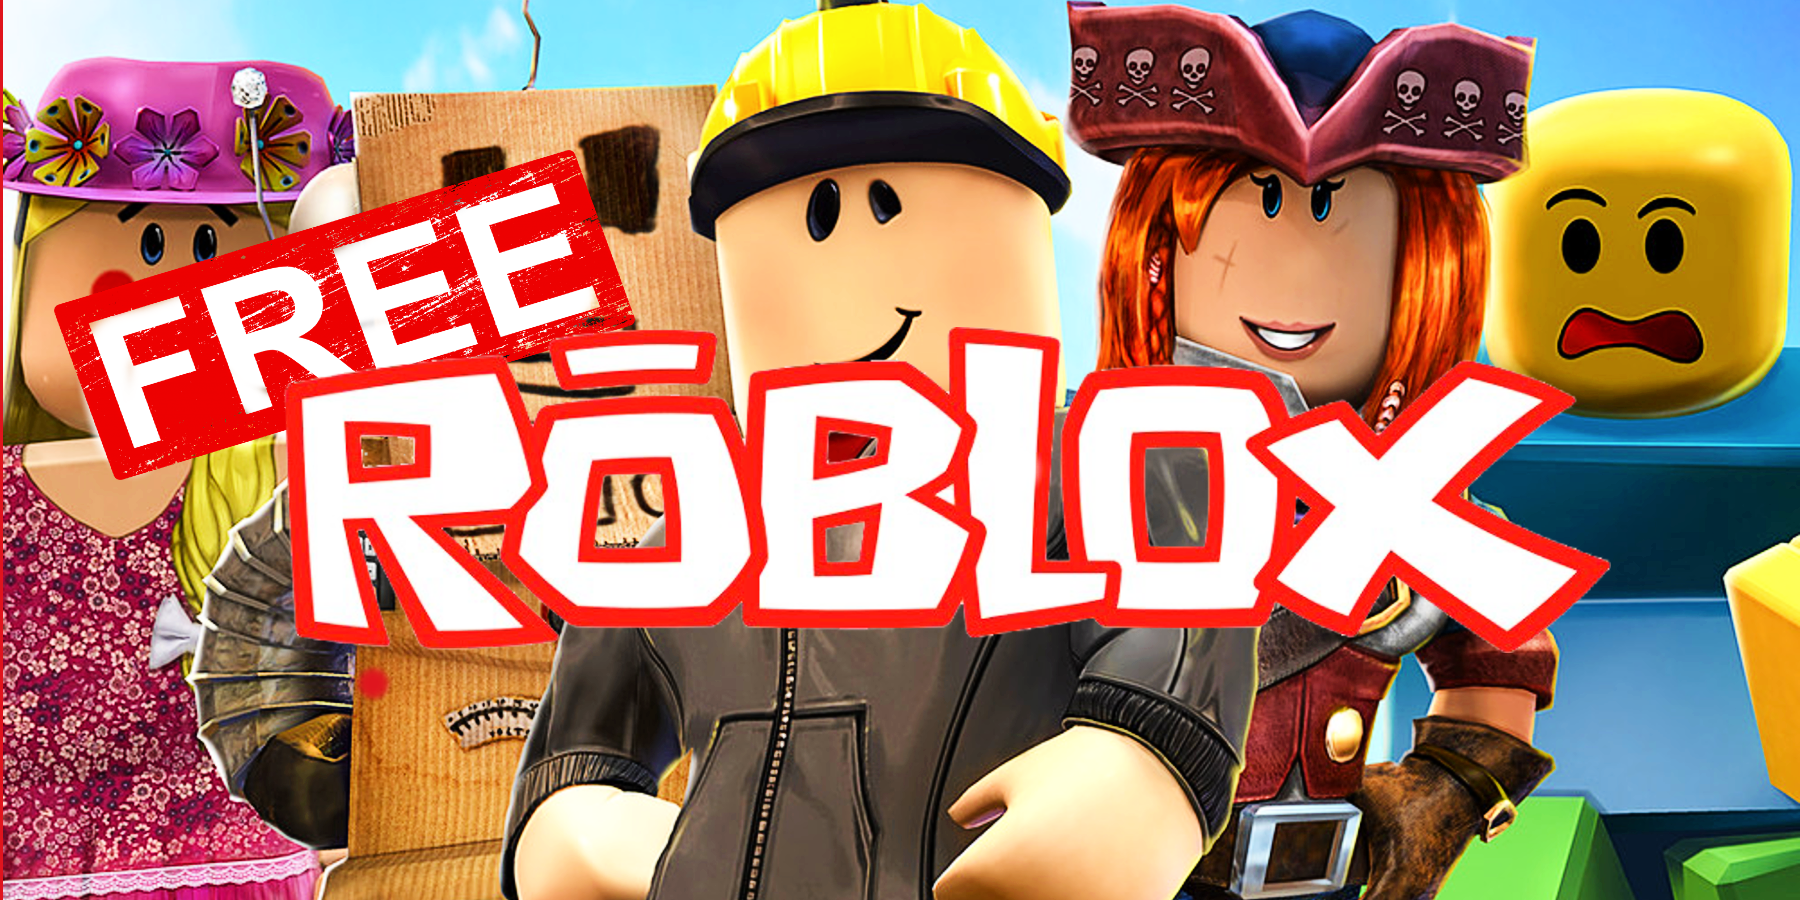 SEPTEMBER* ALL WORKING PROMO CODES ON ROBLOX 2019